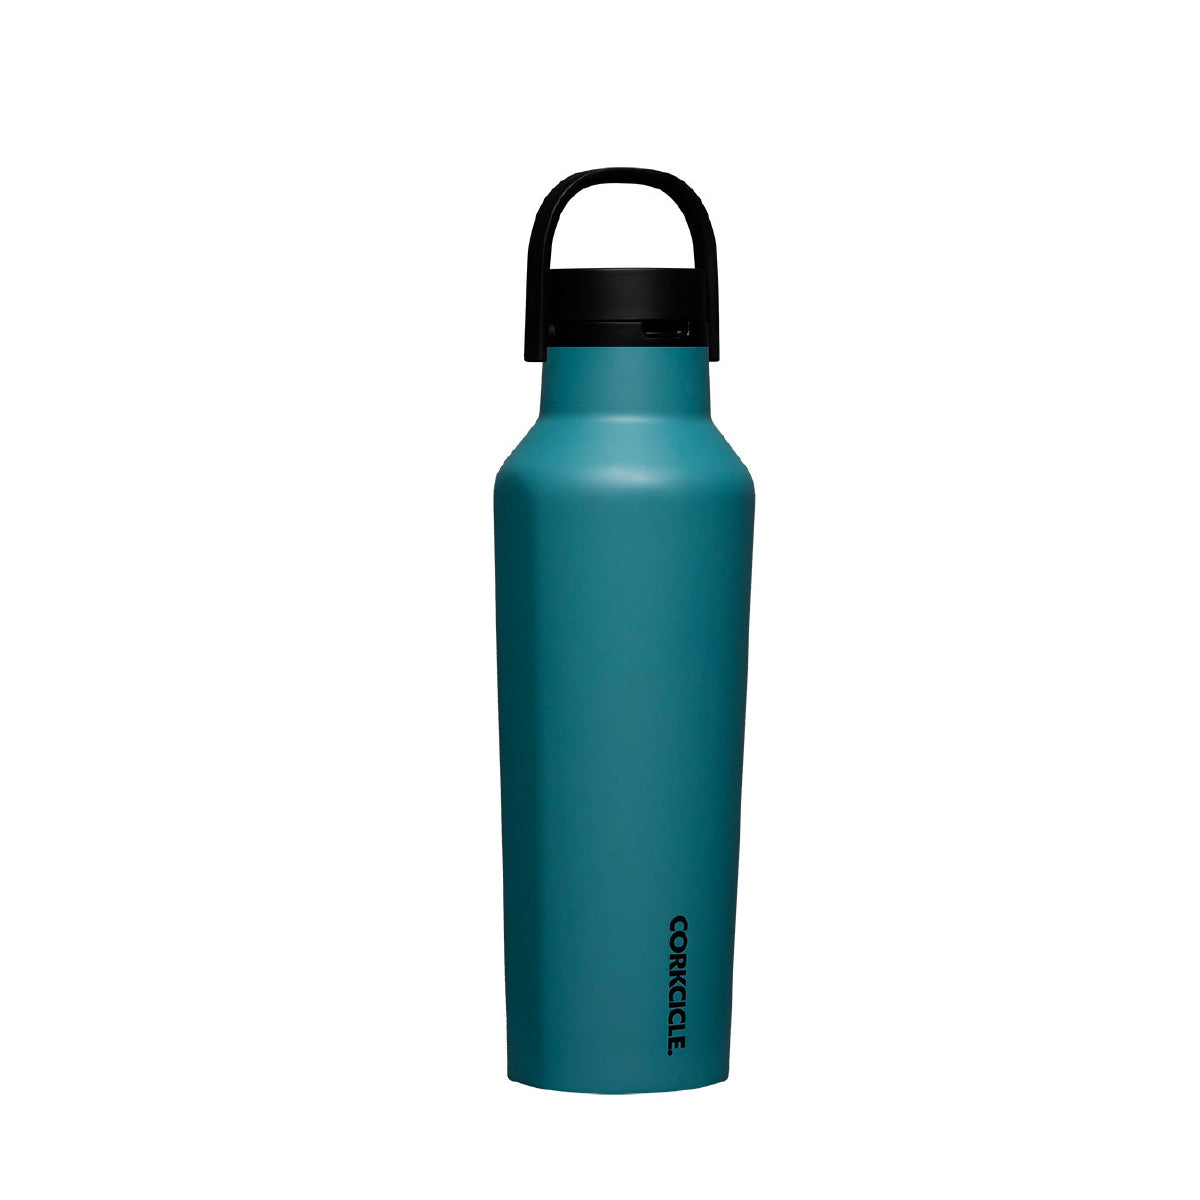 CORKCICLE SPORT CANTEEN REEF